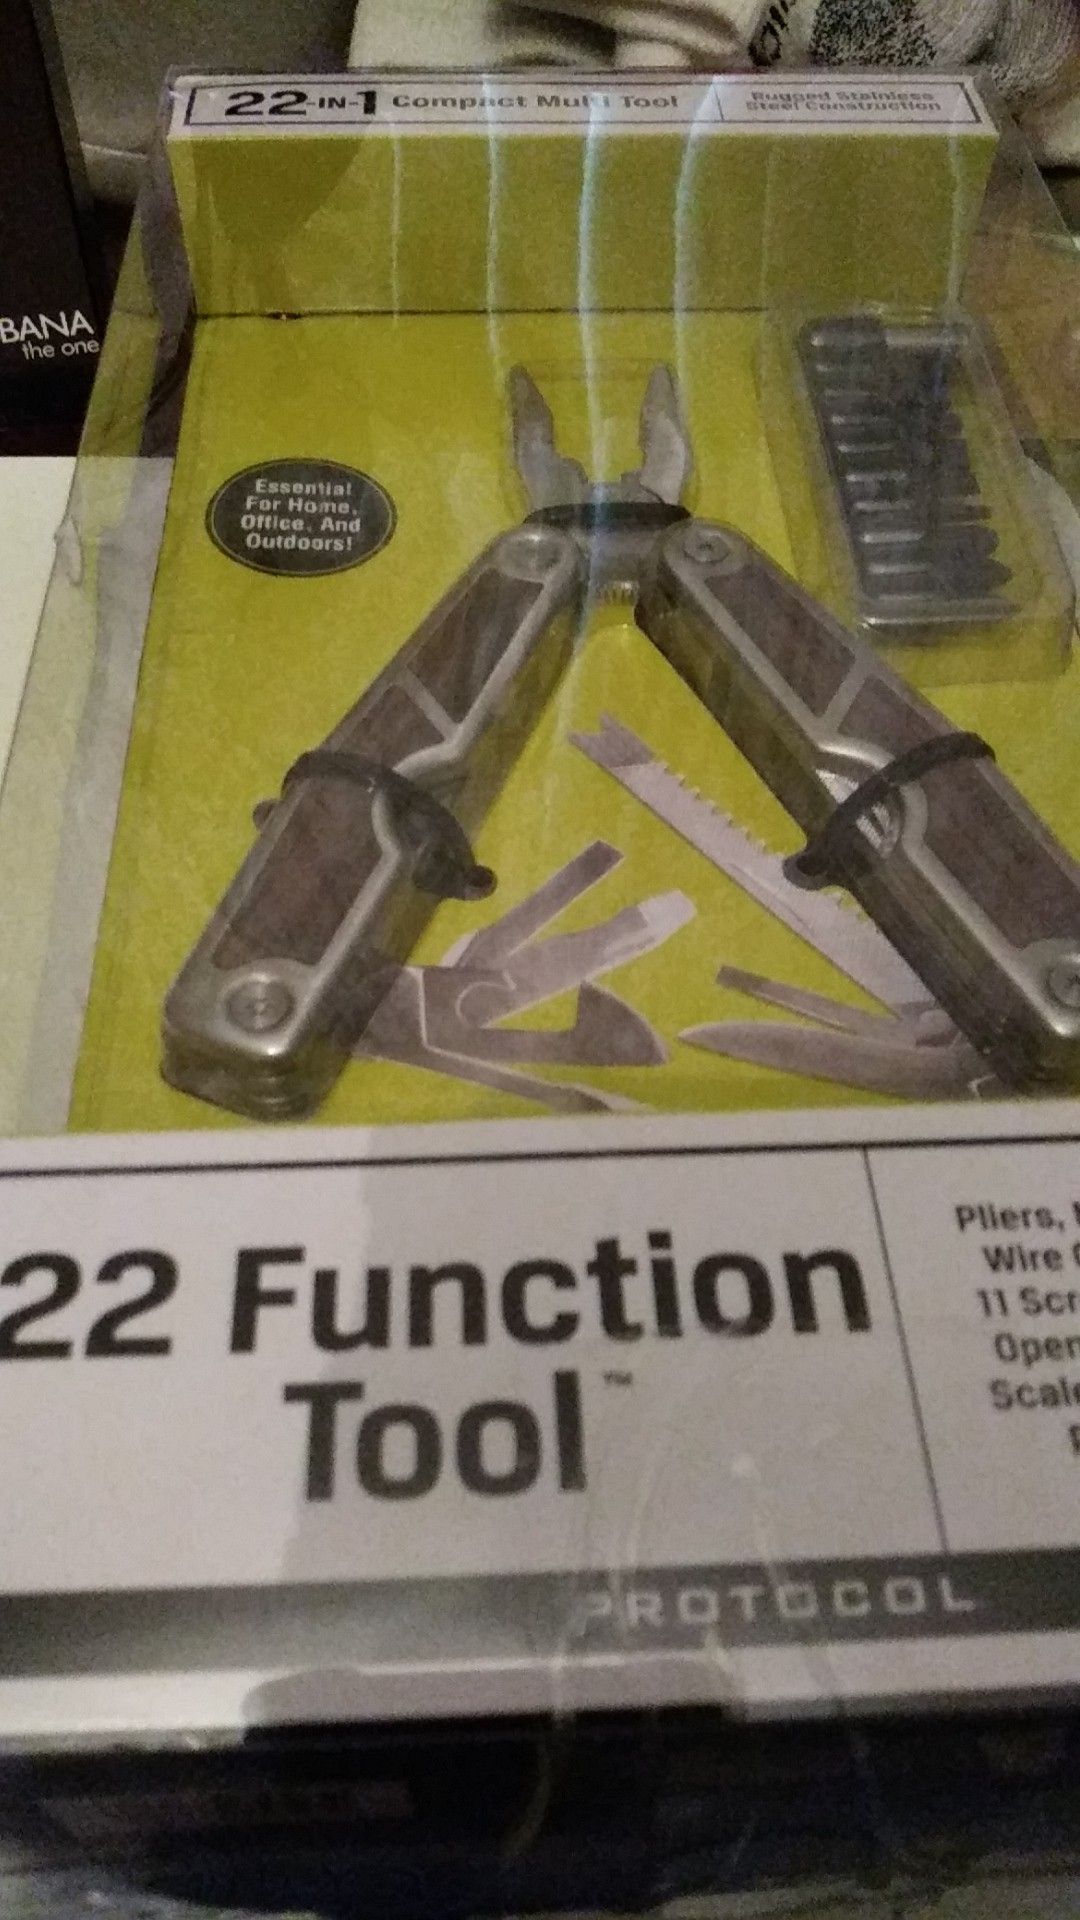 Brand new (never used) 22 function tool kit set 12 tools in one in great shape and condition just need gone please its (urgent)